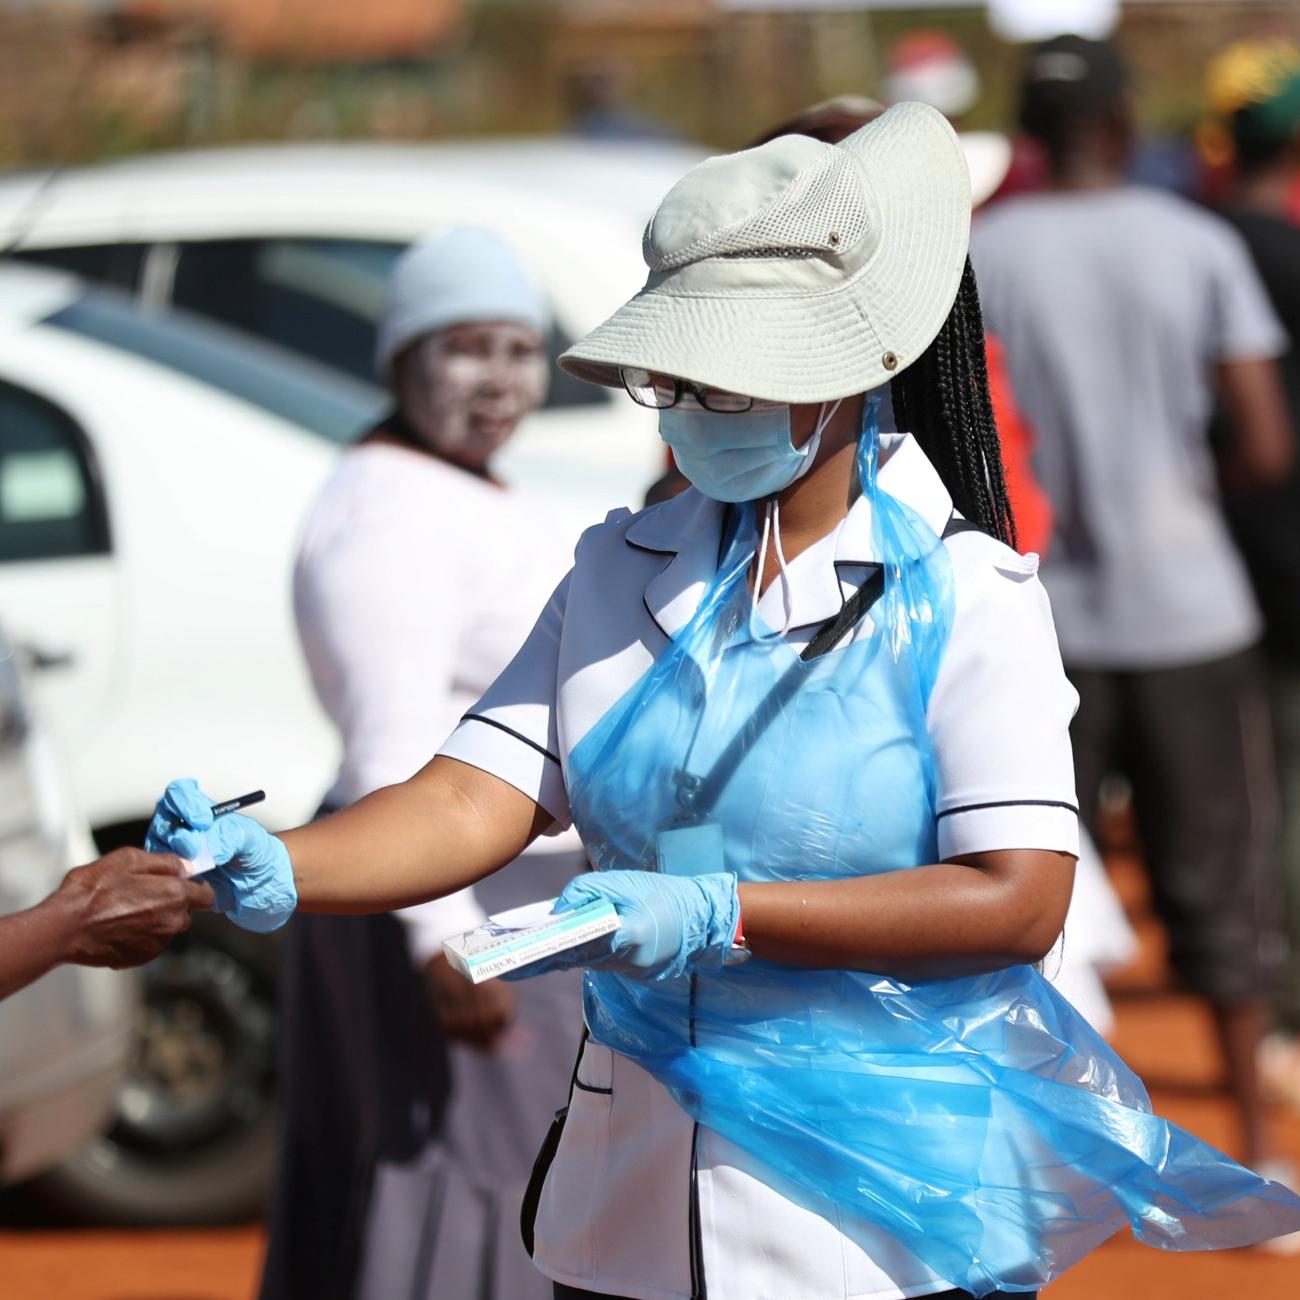 A member of medical staff attends to residents as they queue during screening and testing campaign aimed to combat the spread of COVID-19, in Lenasia, South Africa, on April 21, 2020.